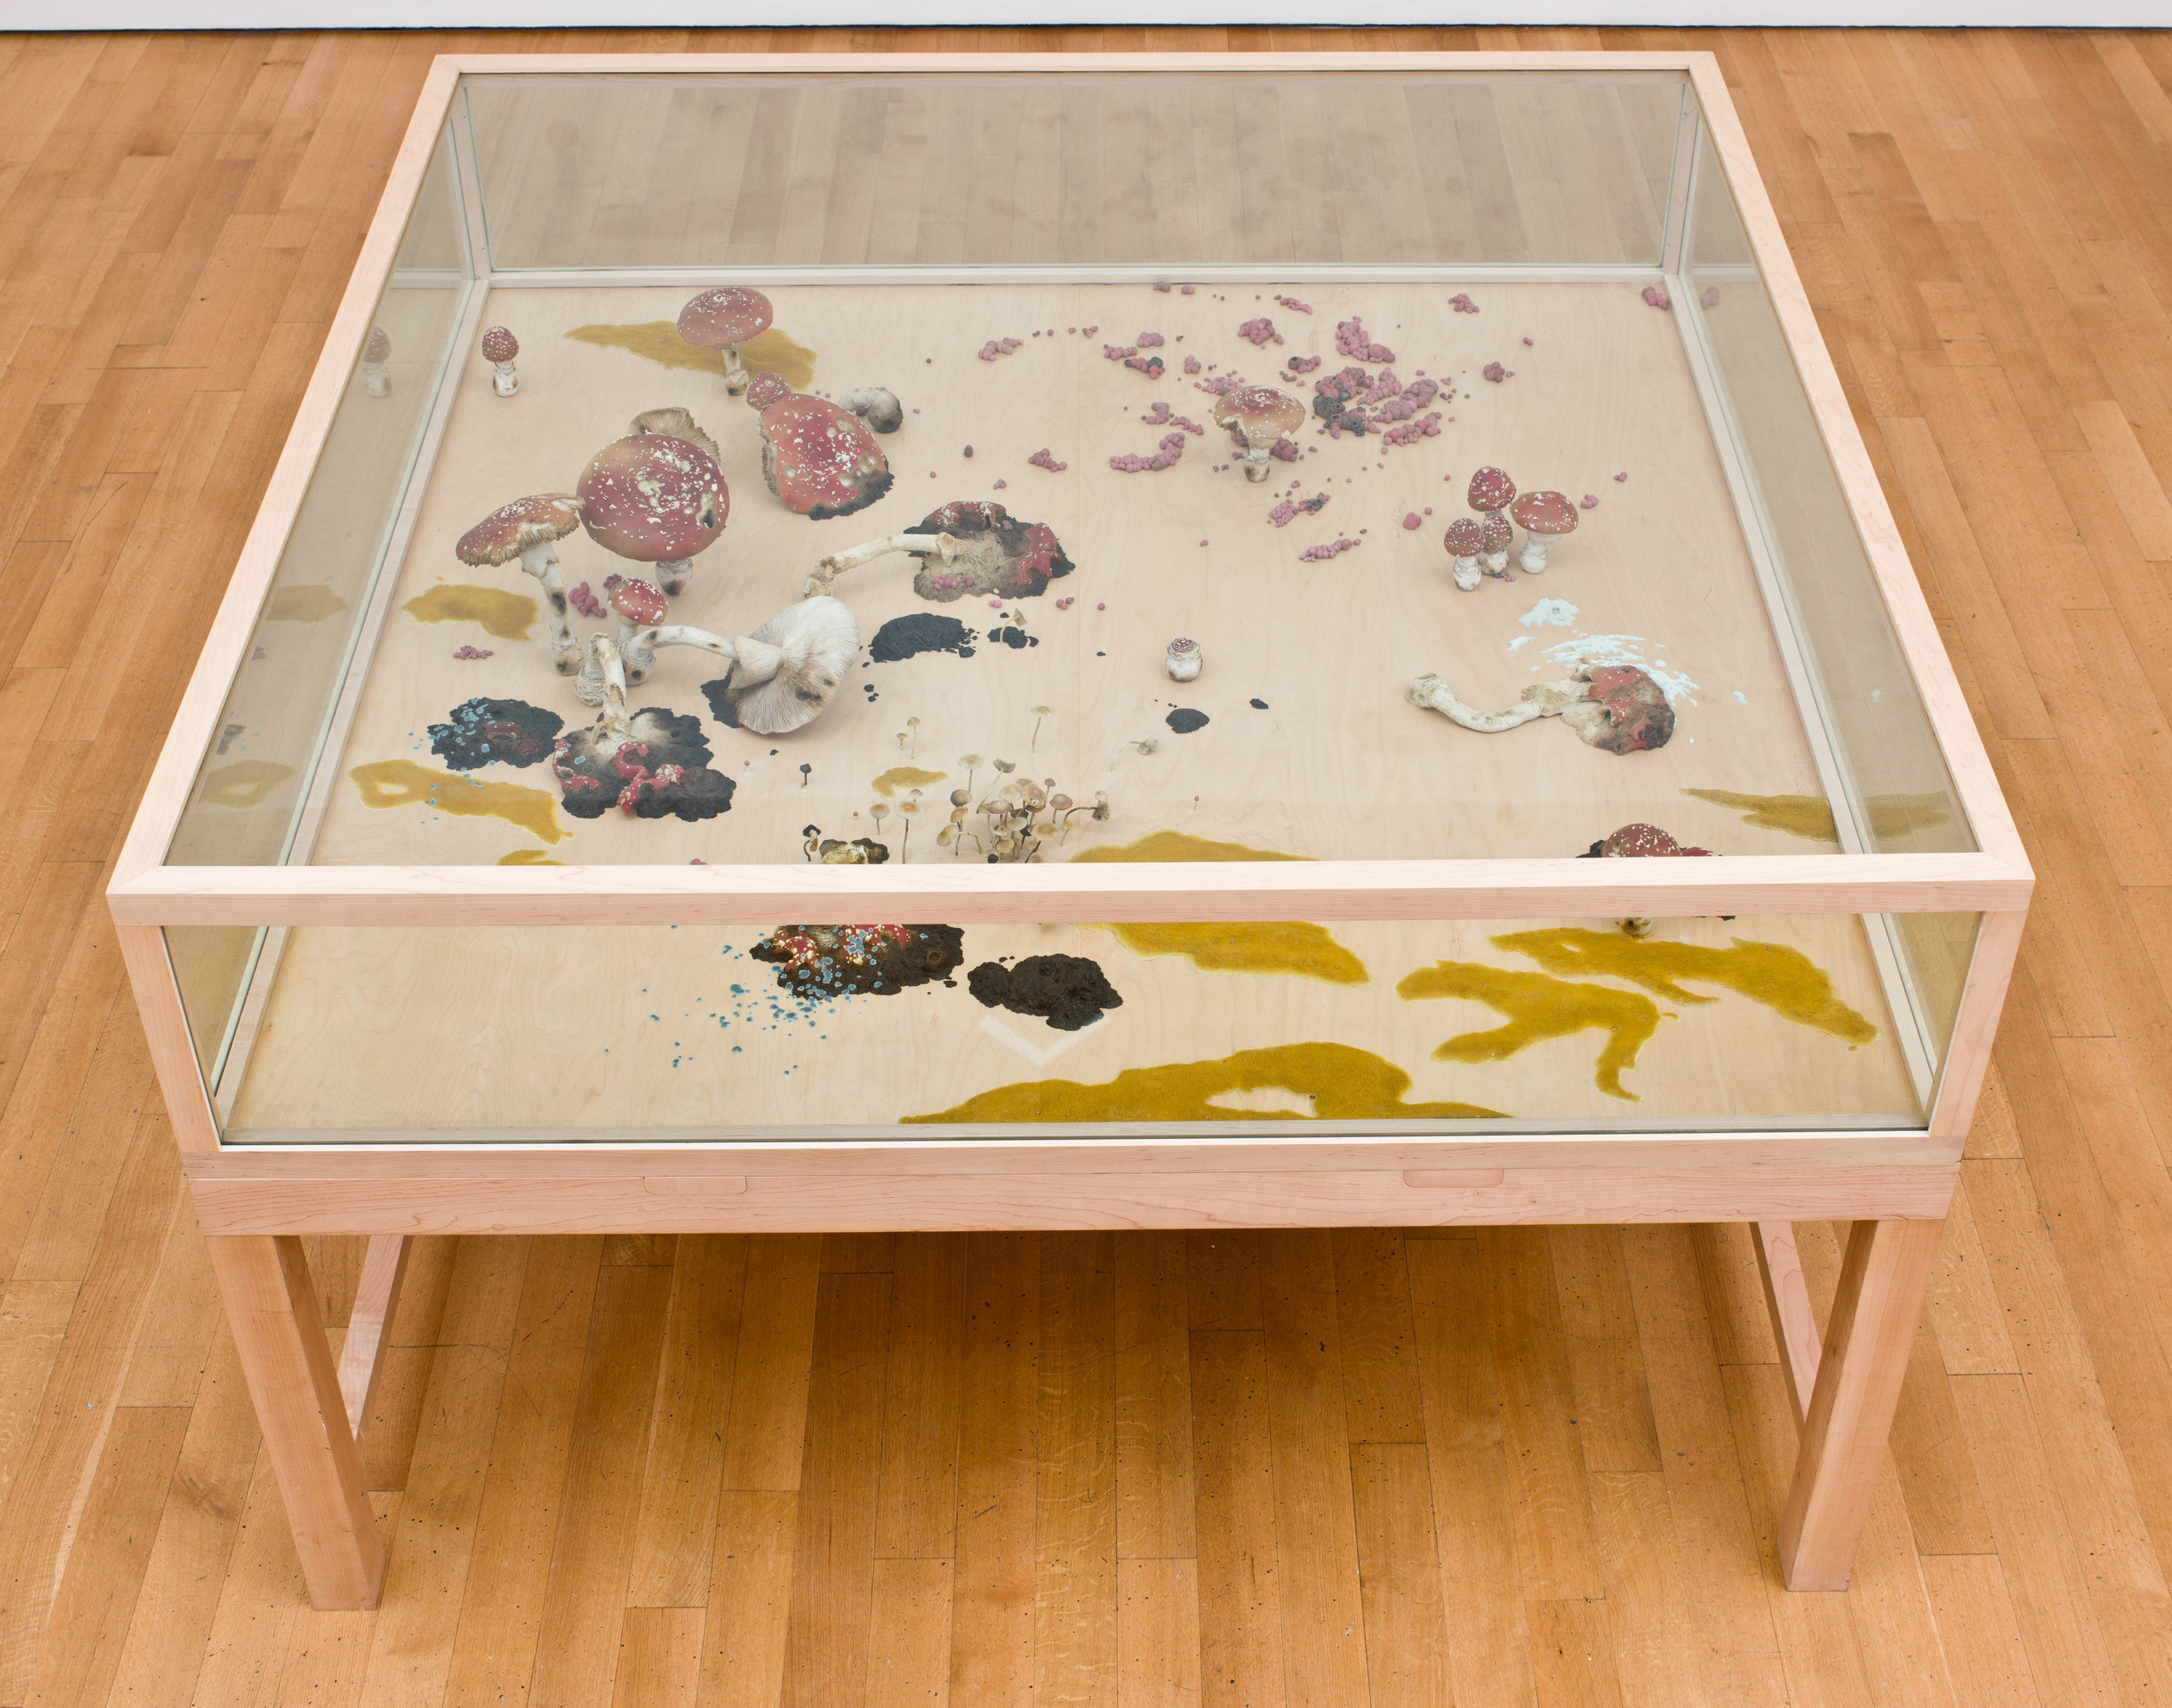  A vs. B, 2004, Thermoset polymer, epoxy, stainless steel, lacquer, oil paint, maple, and glass, 75 1/2 x 75 1/2 x 45 inches 